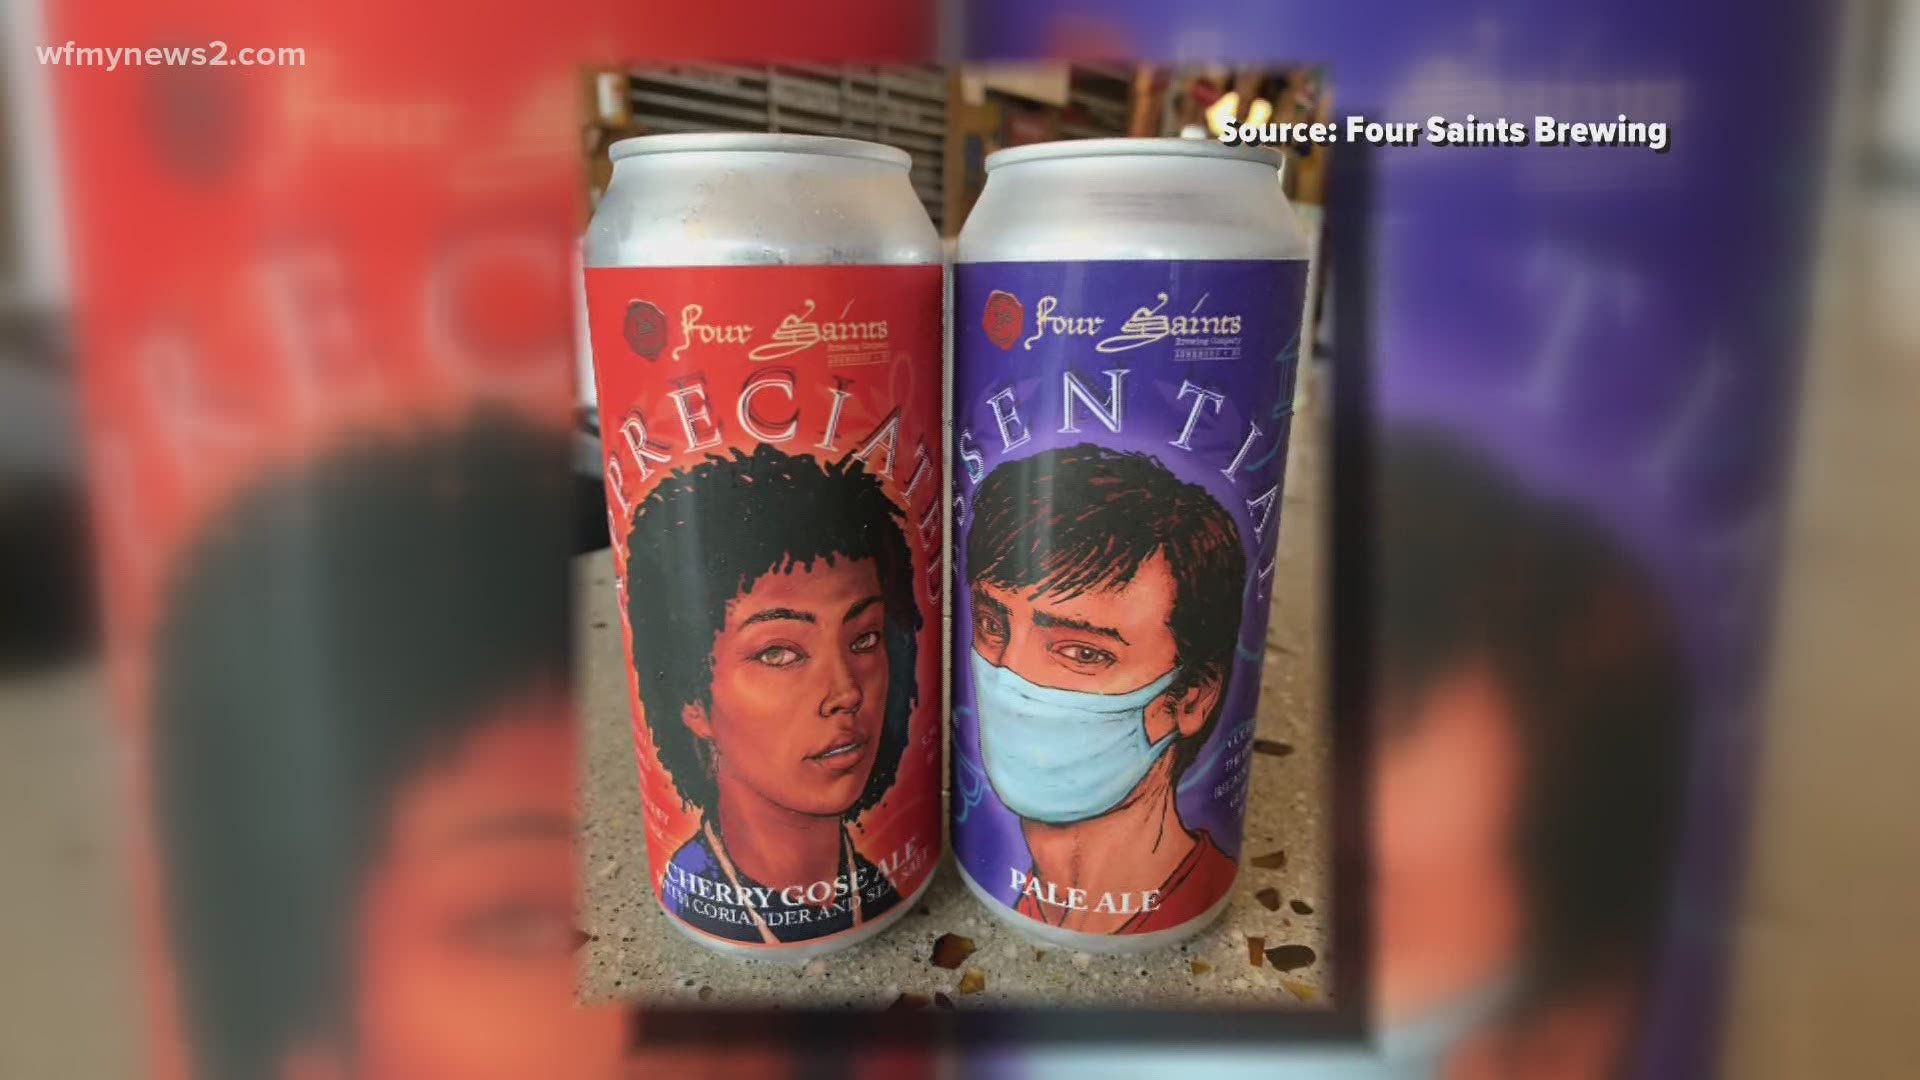 Businesses around the Triad have shown their appreciation to front line workers. One Triad brewery features essential workers on their cans.